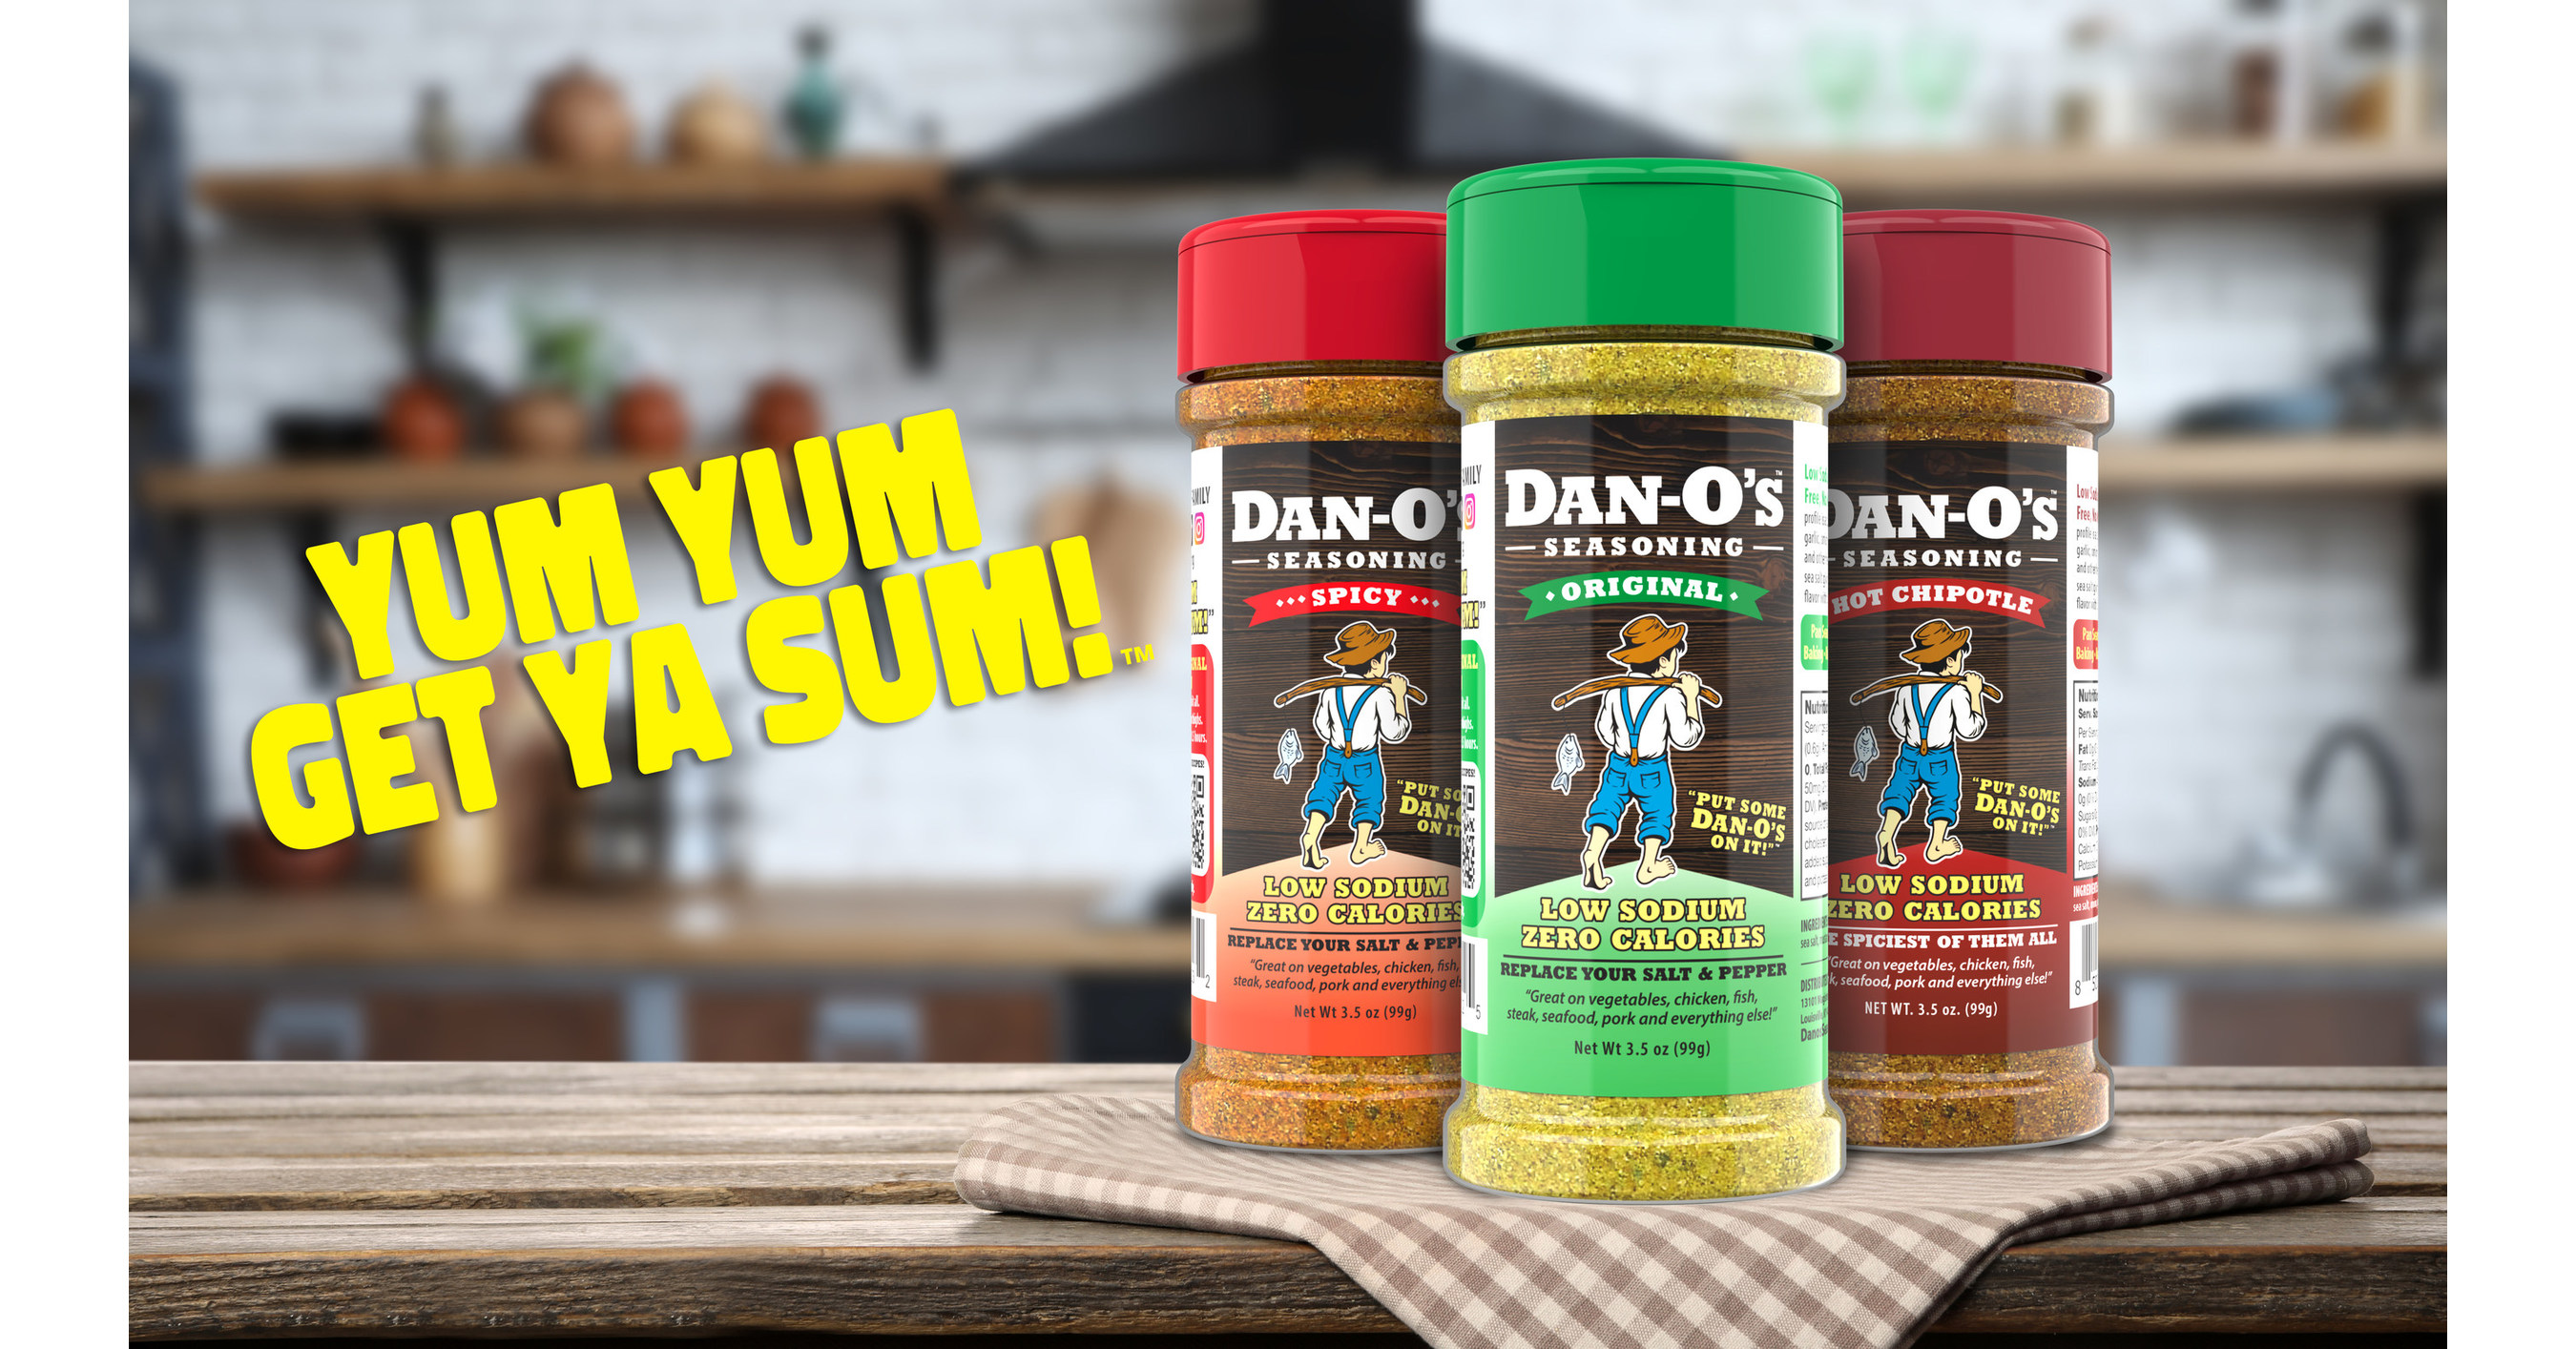 From Flea Markets to Nationwide Grocery Shelves: How Dan-O's Seasoning  Leveraged TikTok to Fuel Growth